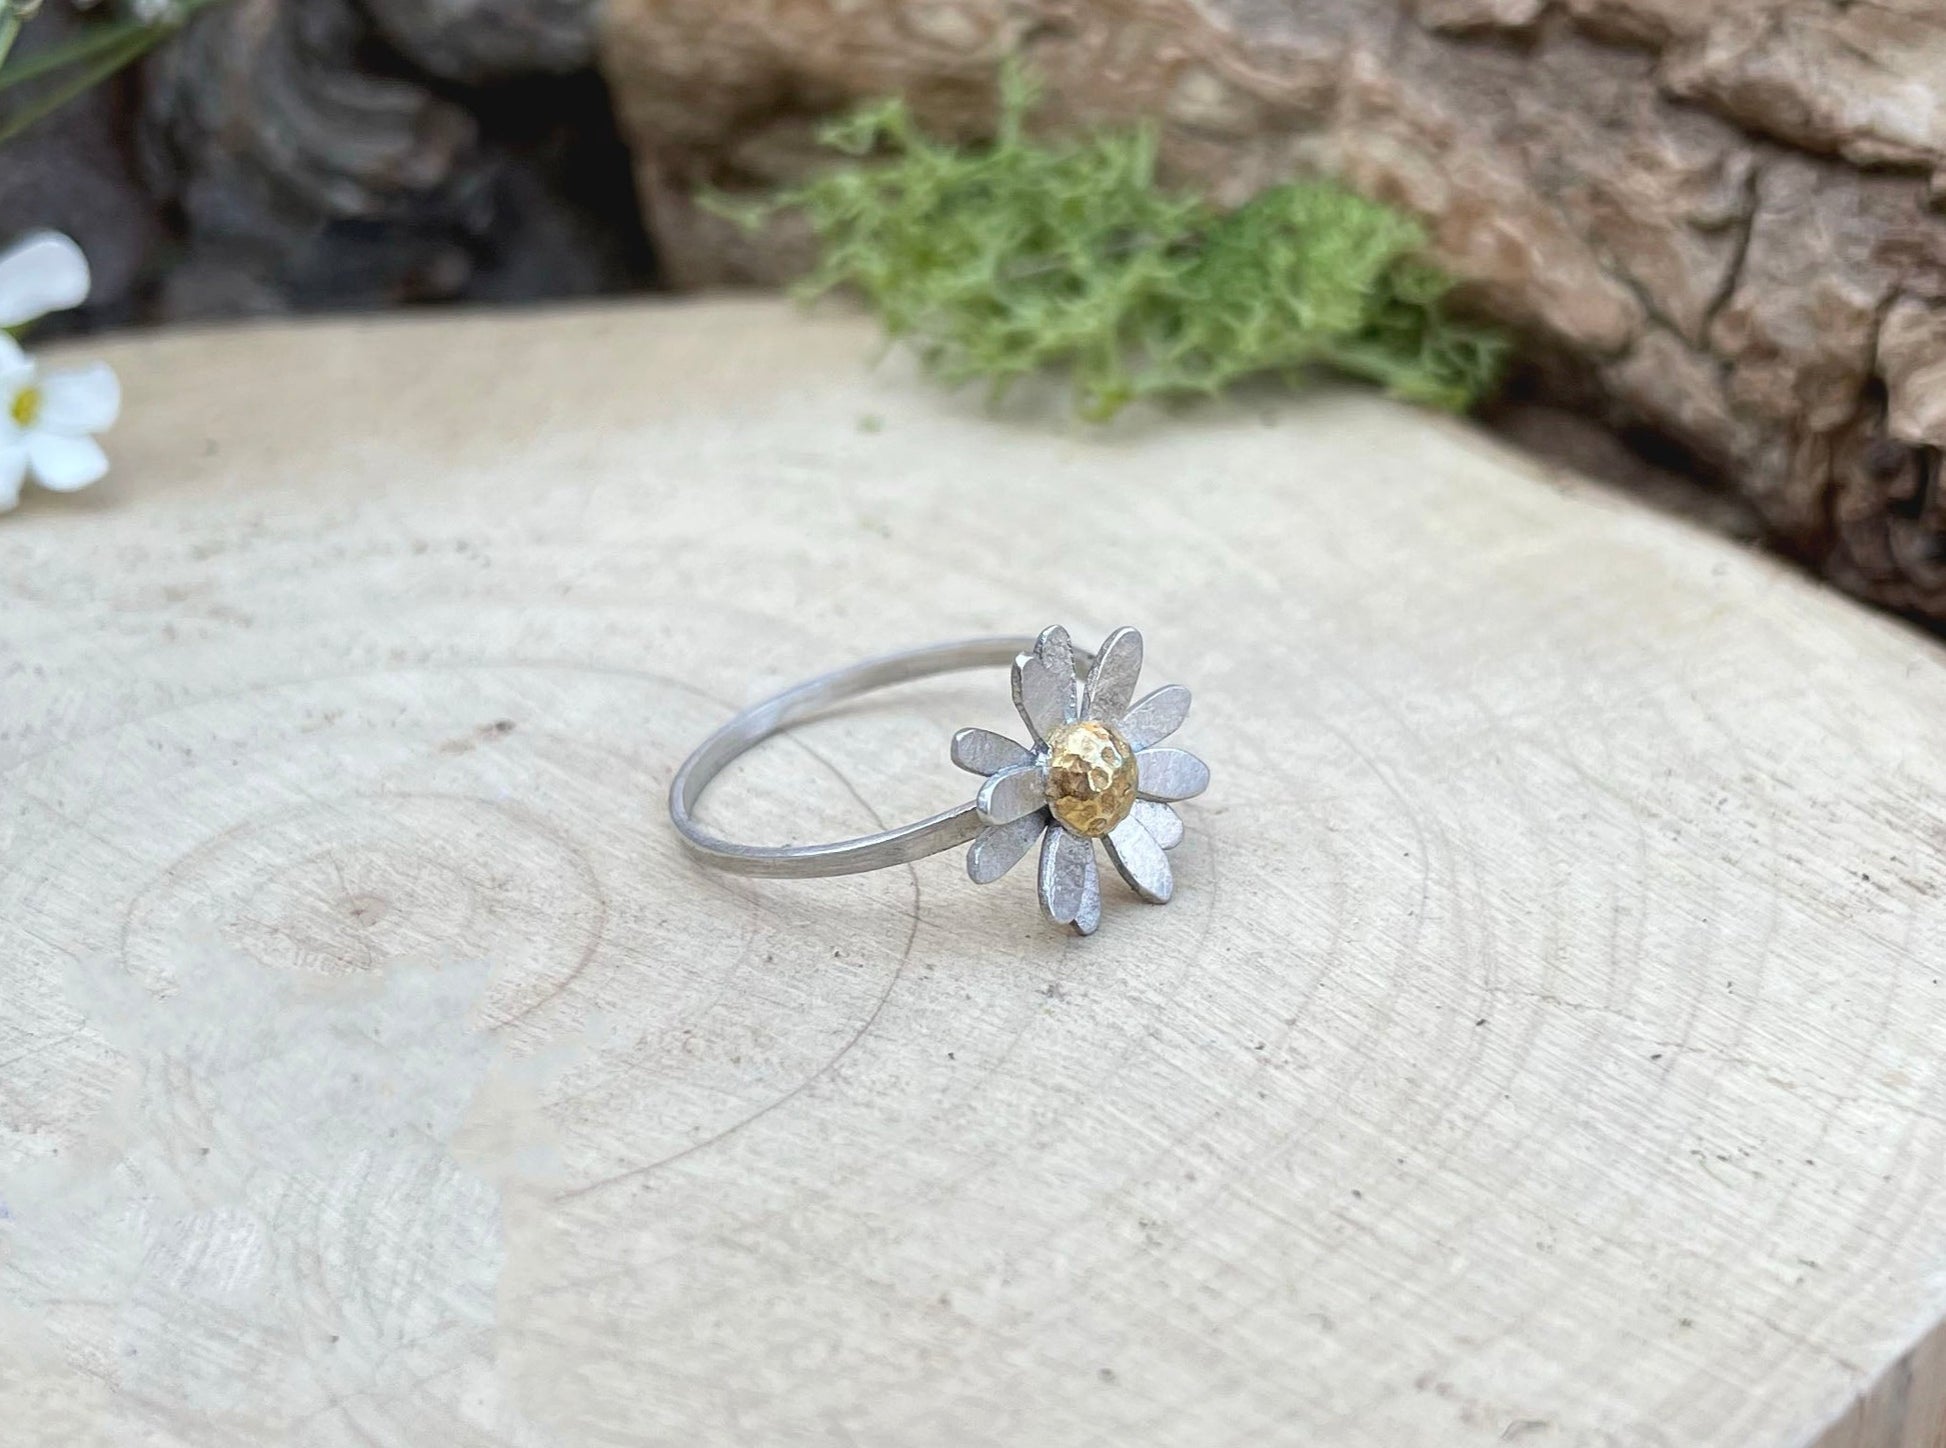 Gold & Silver Daisy Ring by Curious Magpie Jewellery